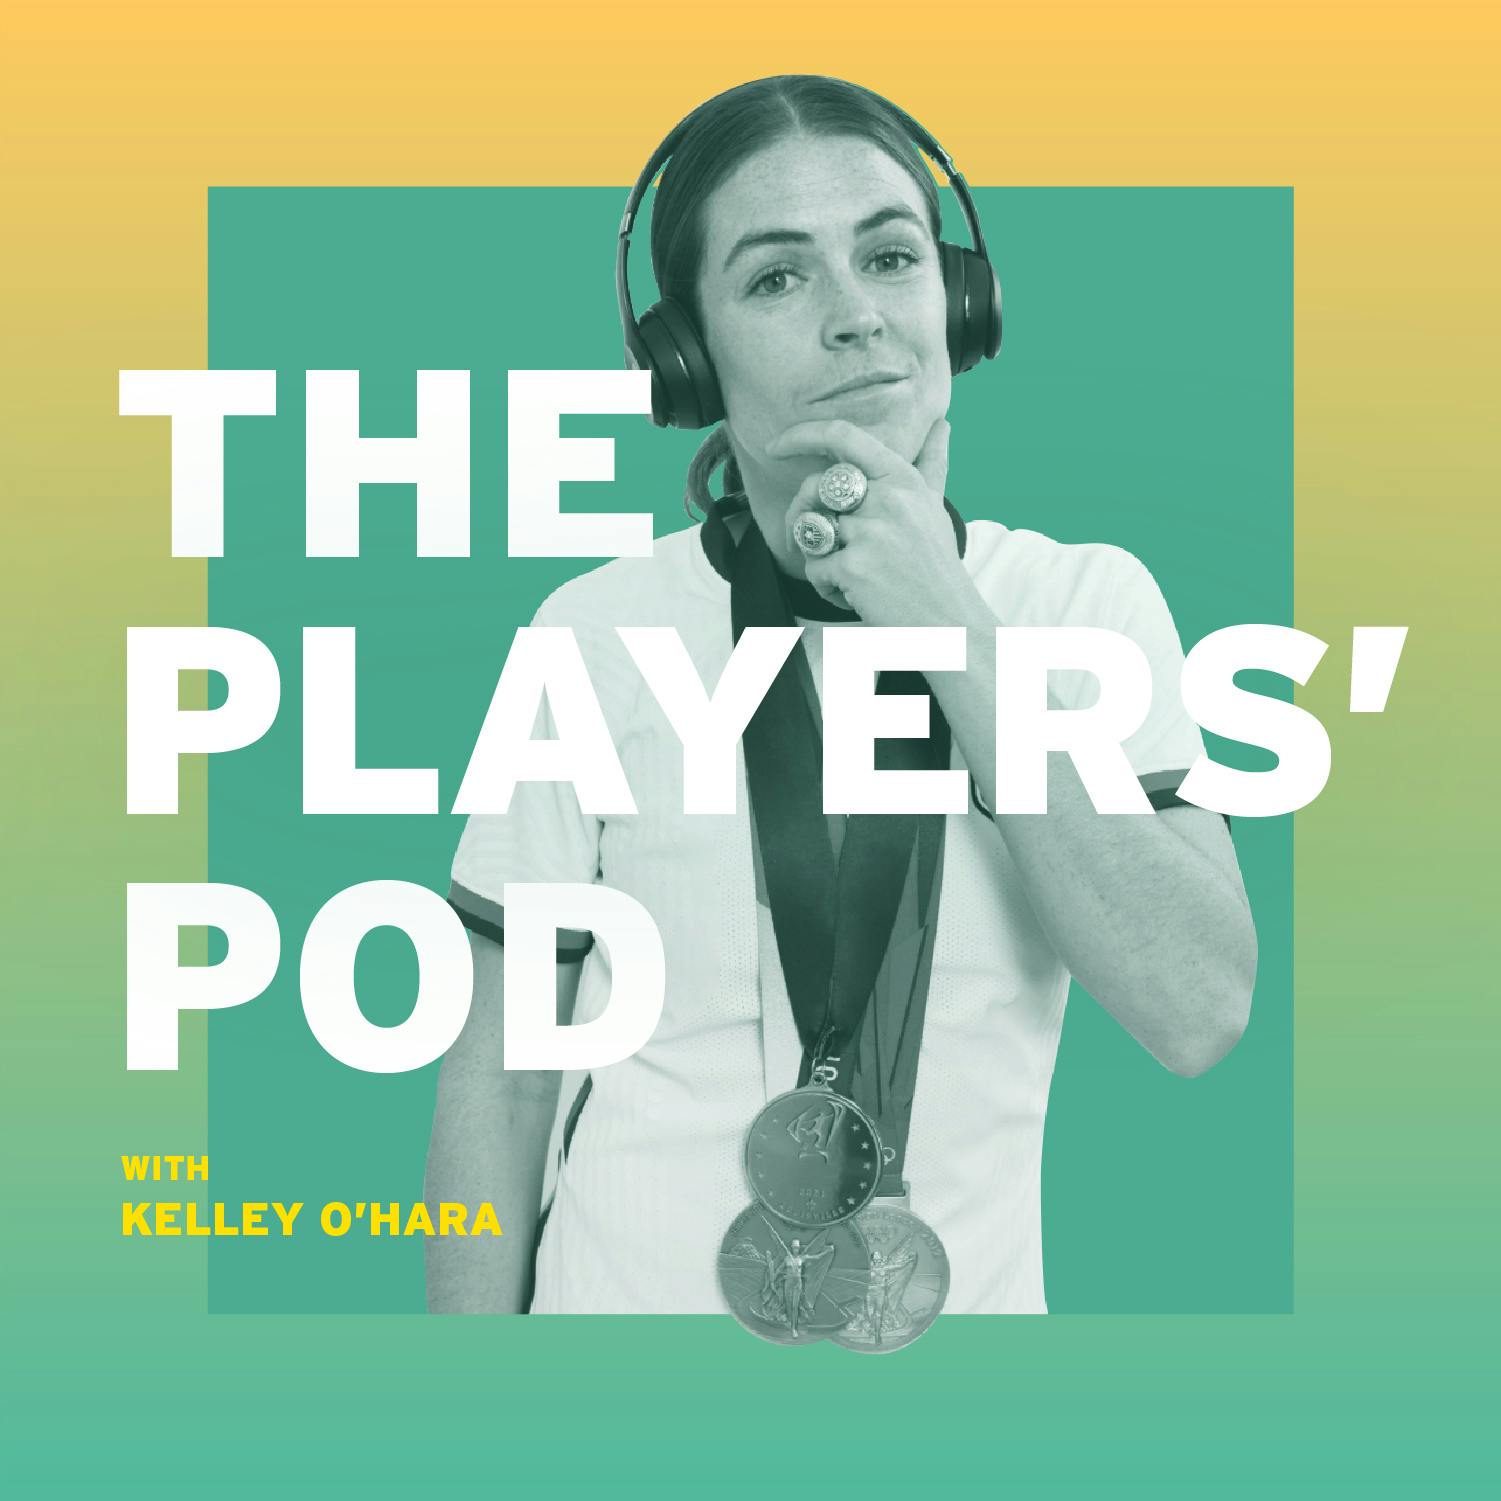 The Just Women's Sports Podcast Update with Kelley O'Hara and Haley Rosen